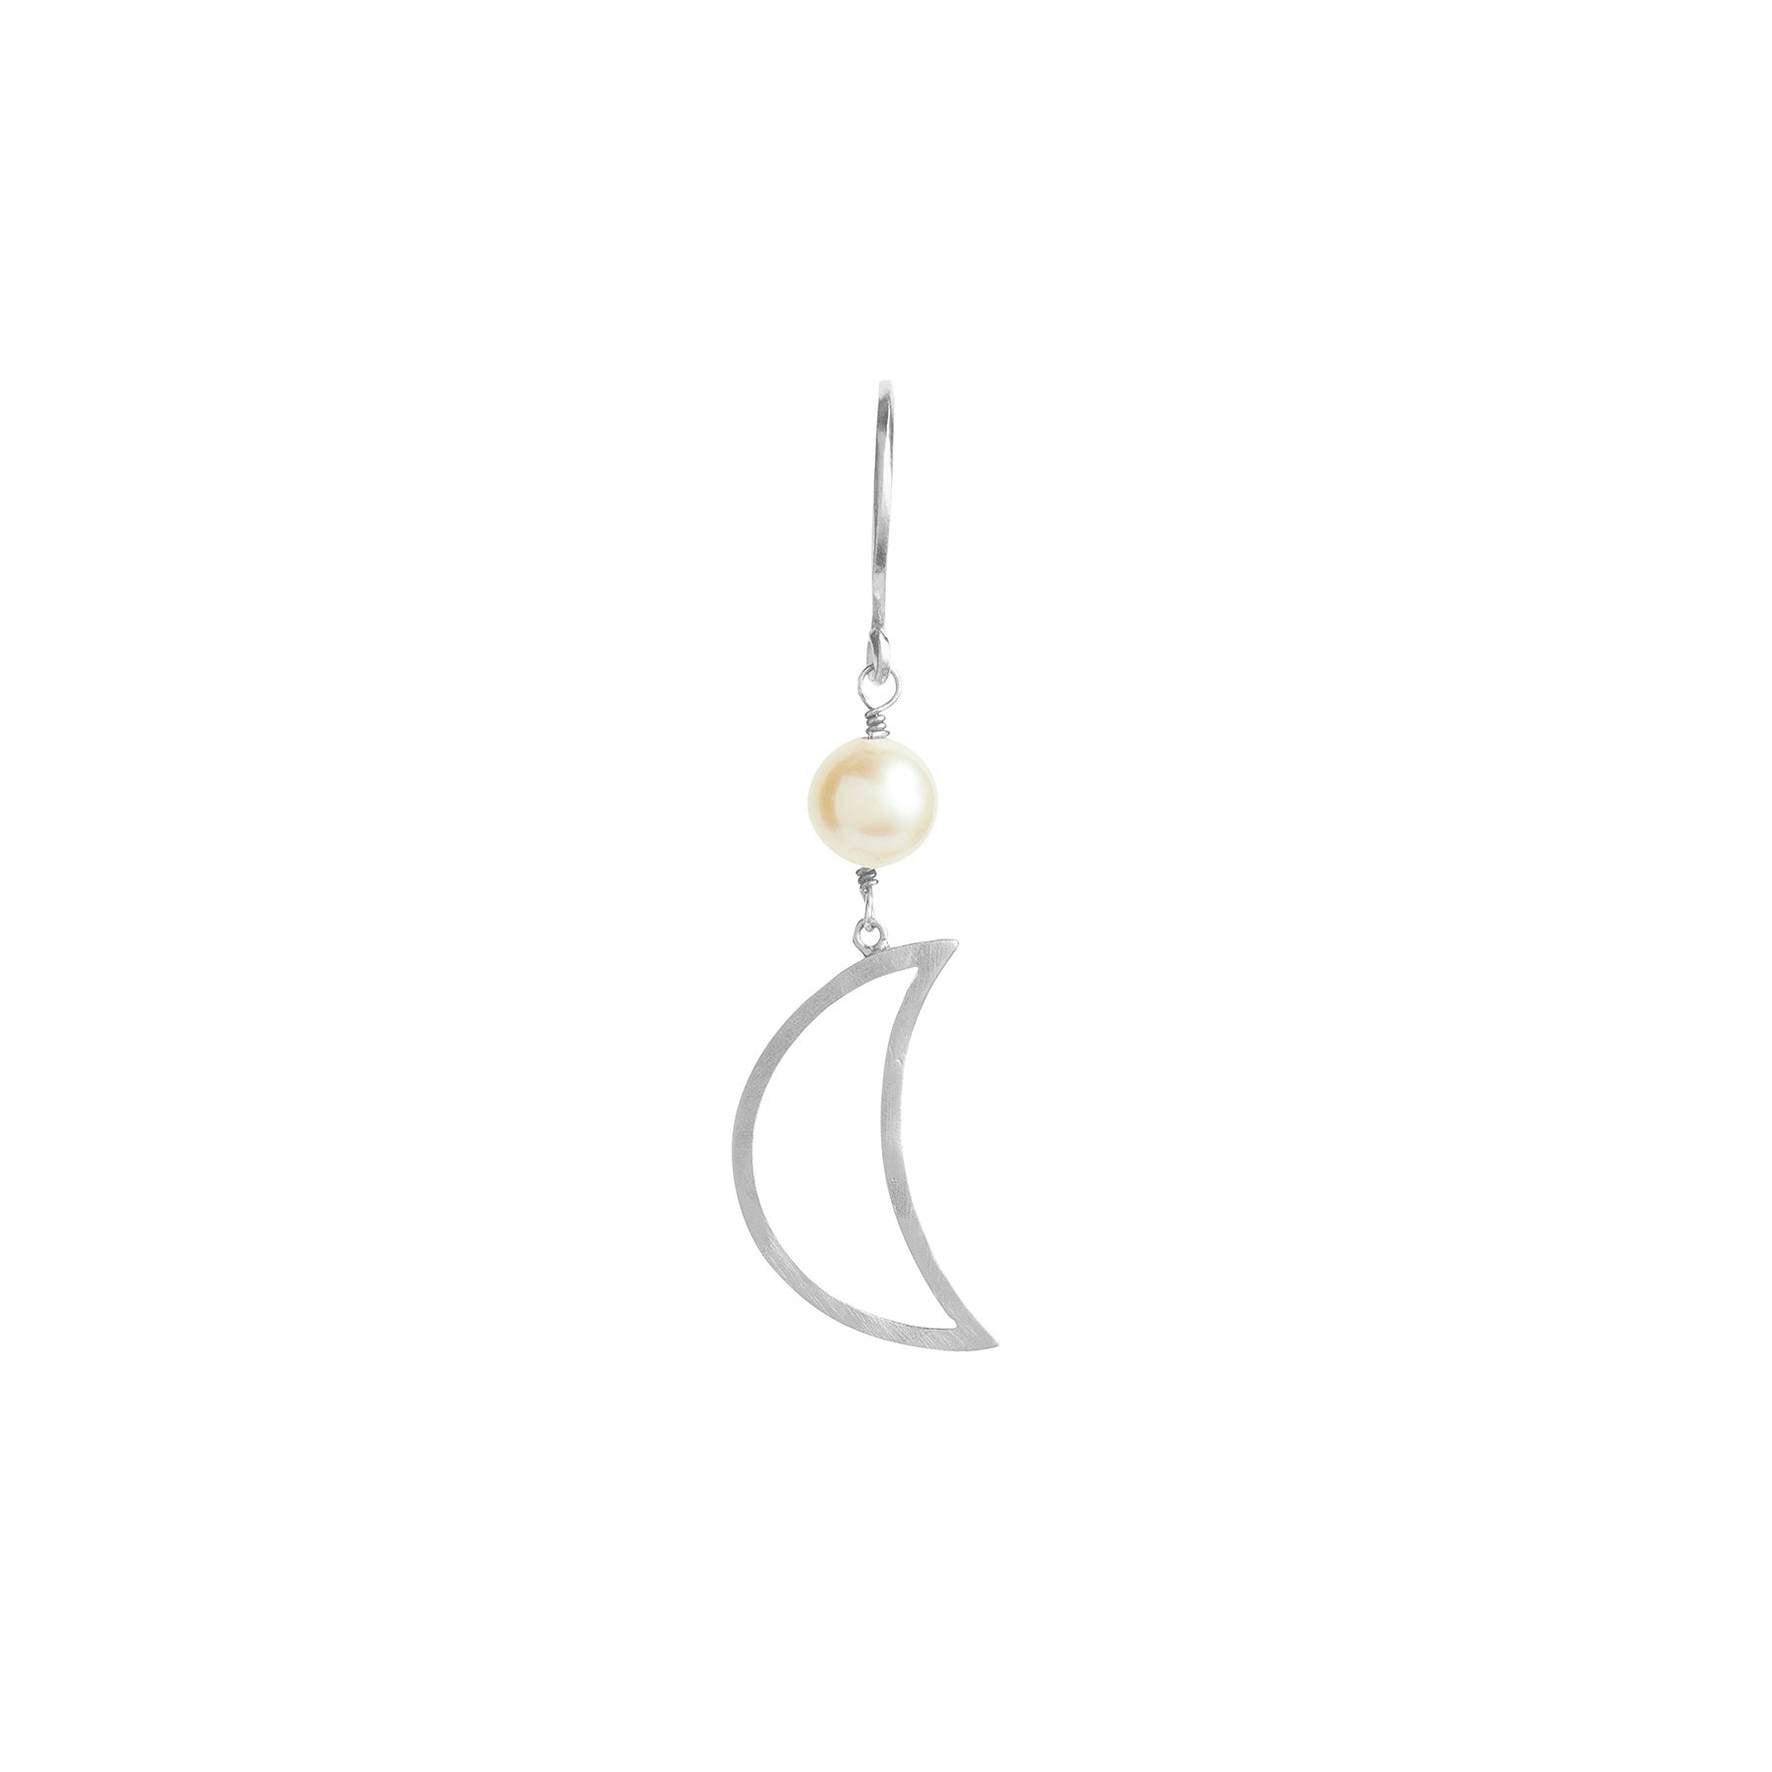 Bella Moon Earring With Pearl von STINE A Jewelry in Silber Sterling 925